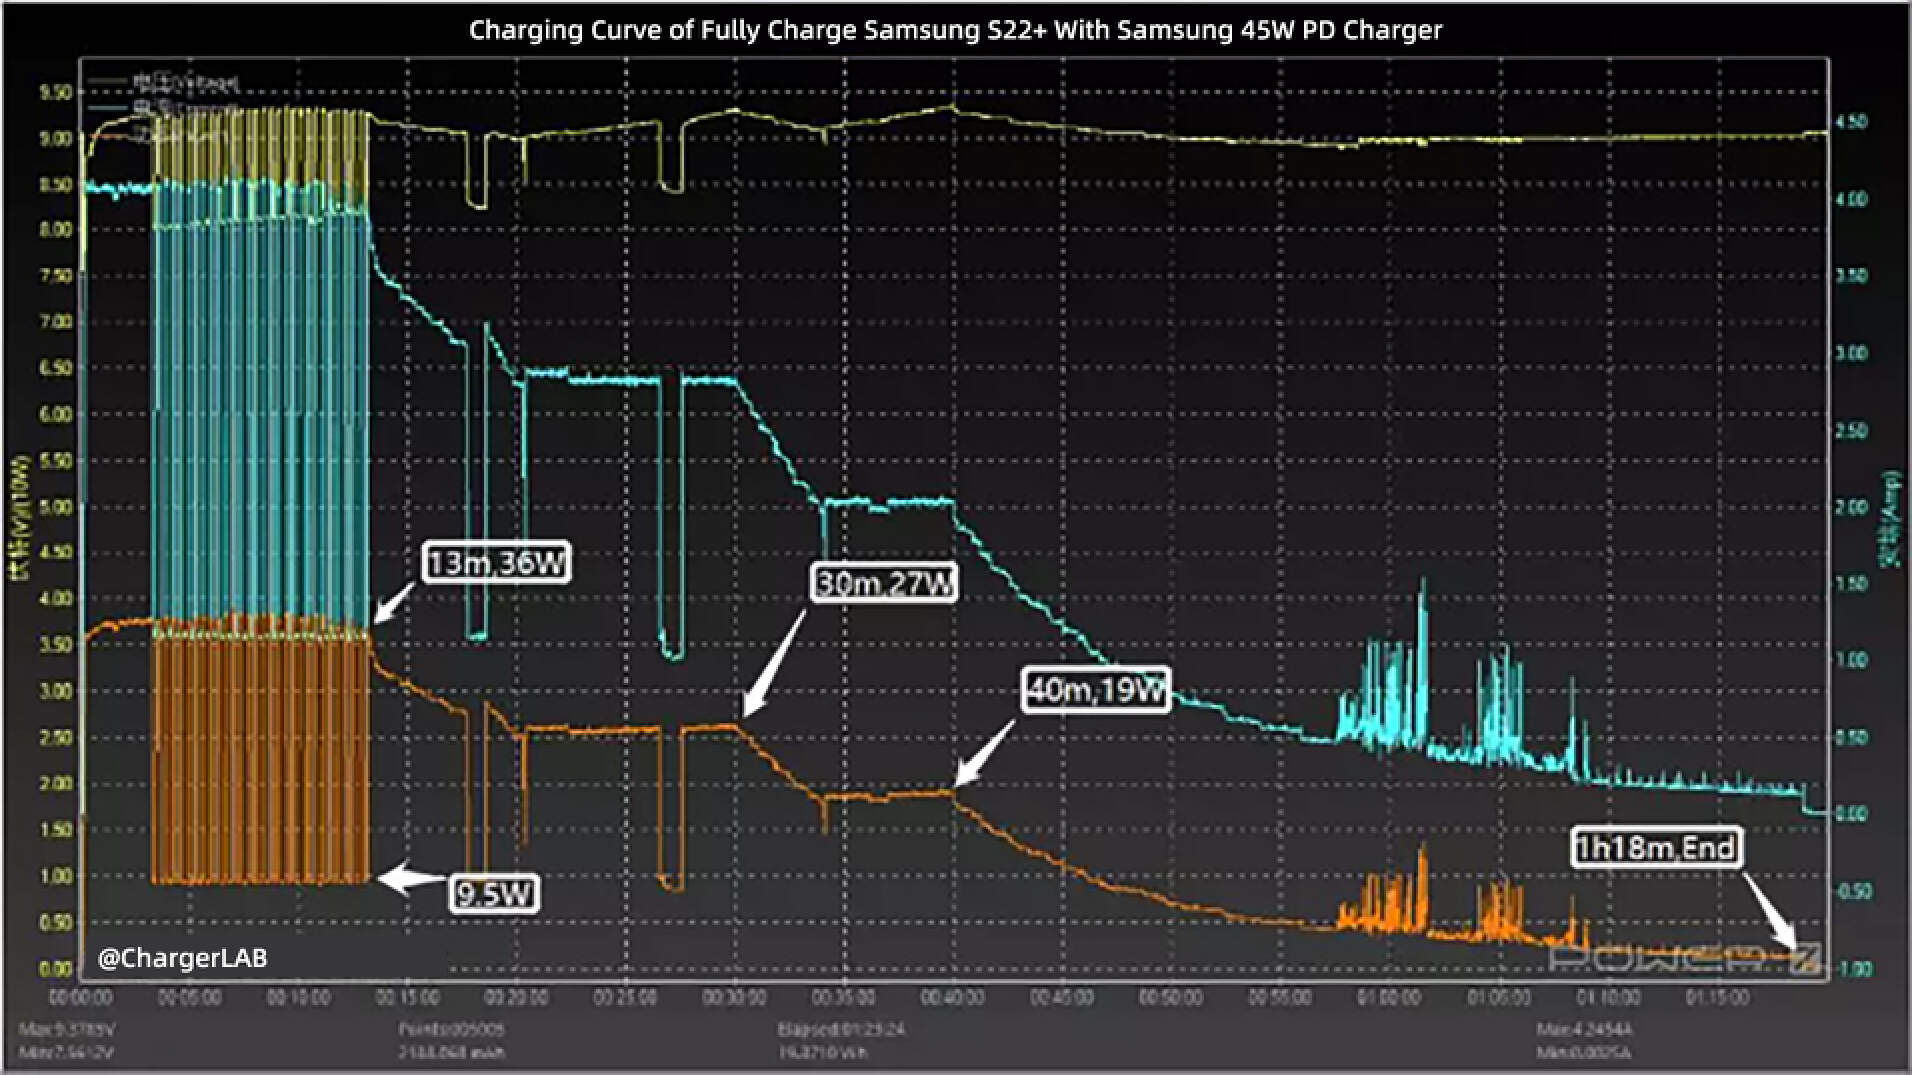 Samsung Galaxy S23: Improved Fast Charging Performance-Chargerlab